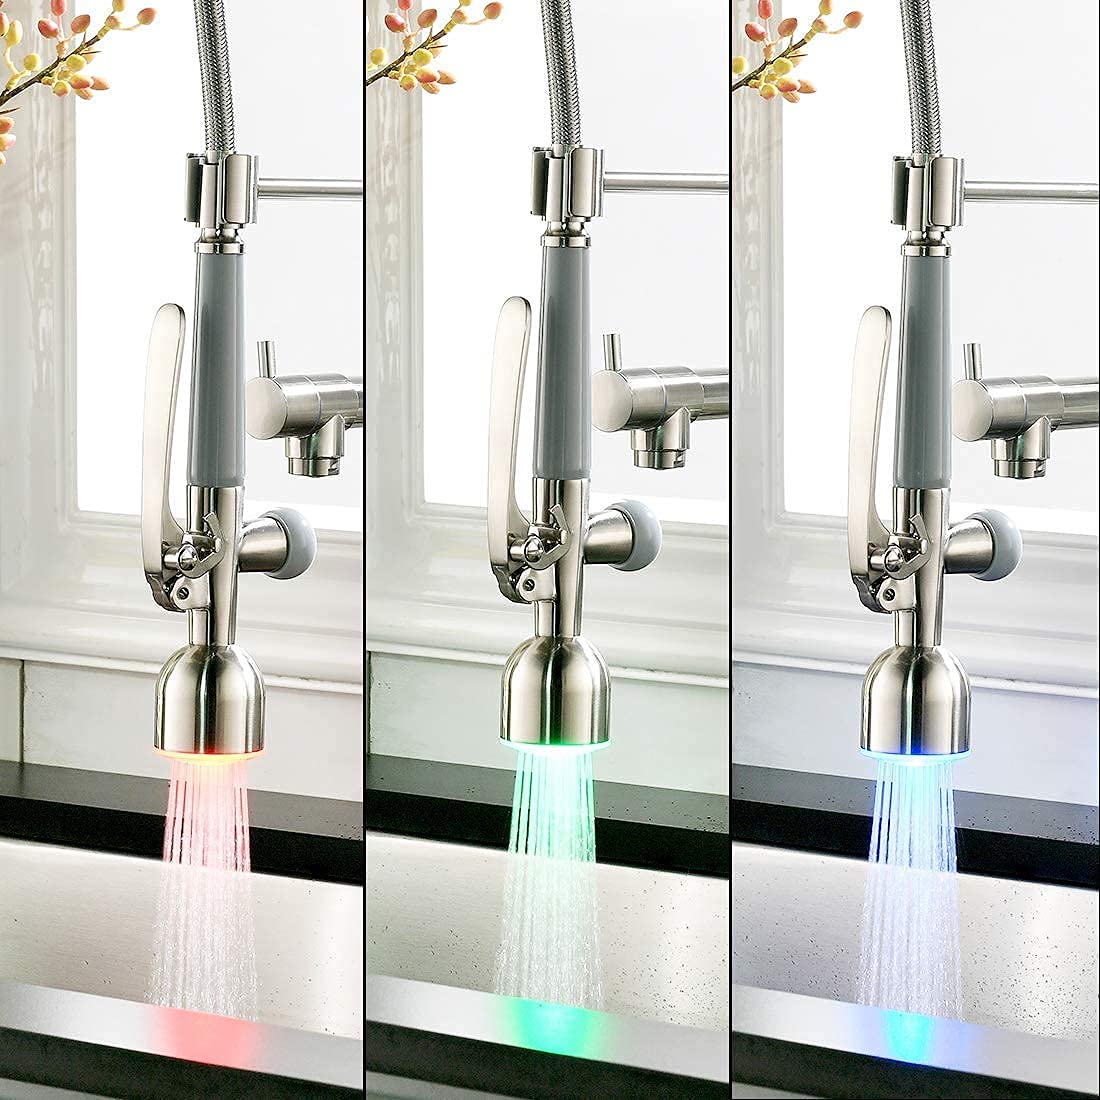 Fapully LED Kitchen Faucet Pull Down Sprayer and Deck Plate Brushed Nickel